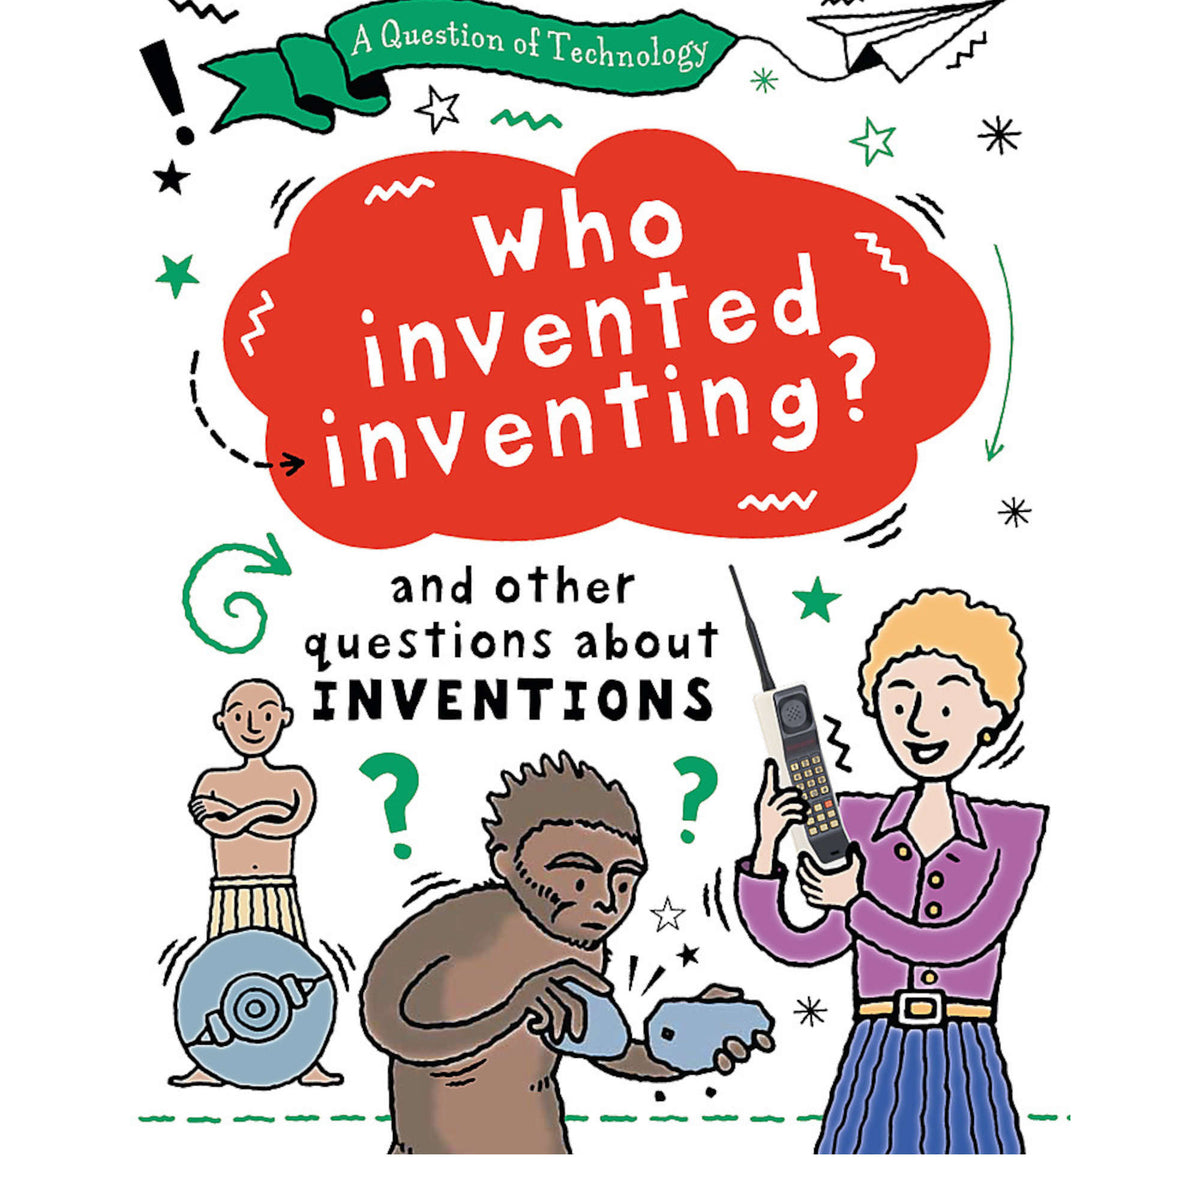 A Question of Technology: Who Invented Inventing?